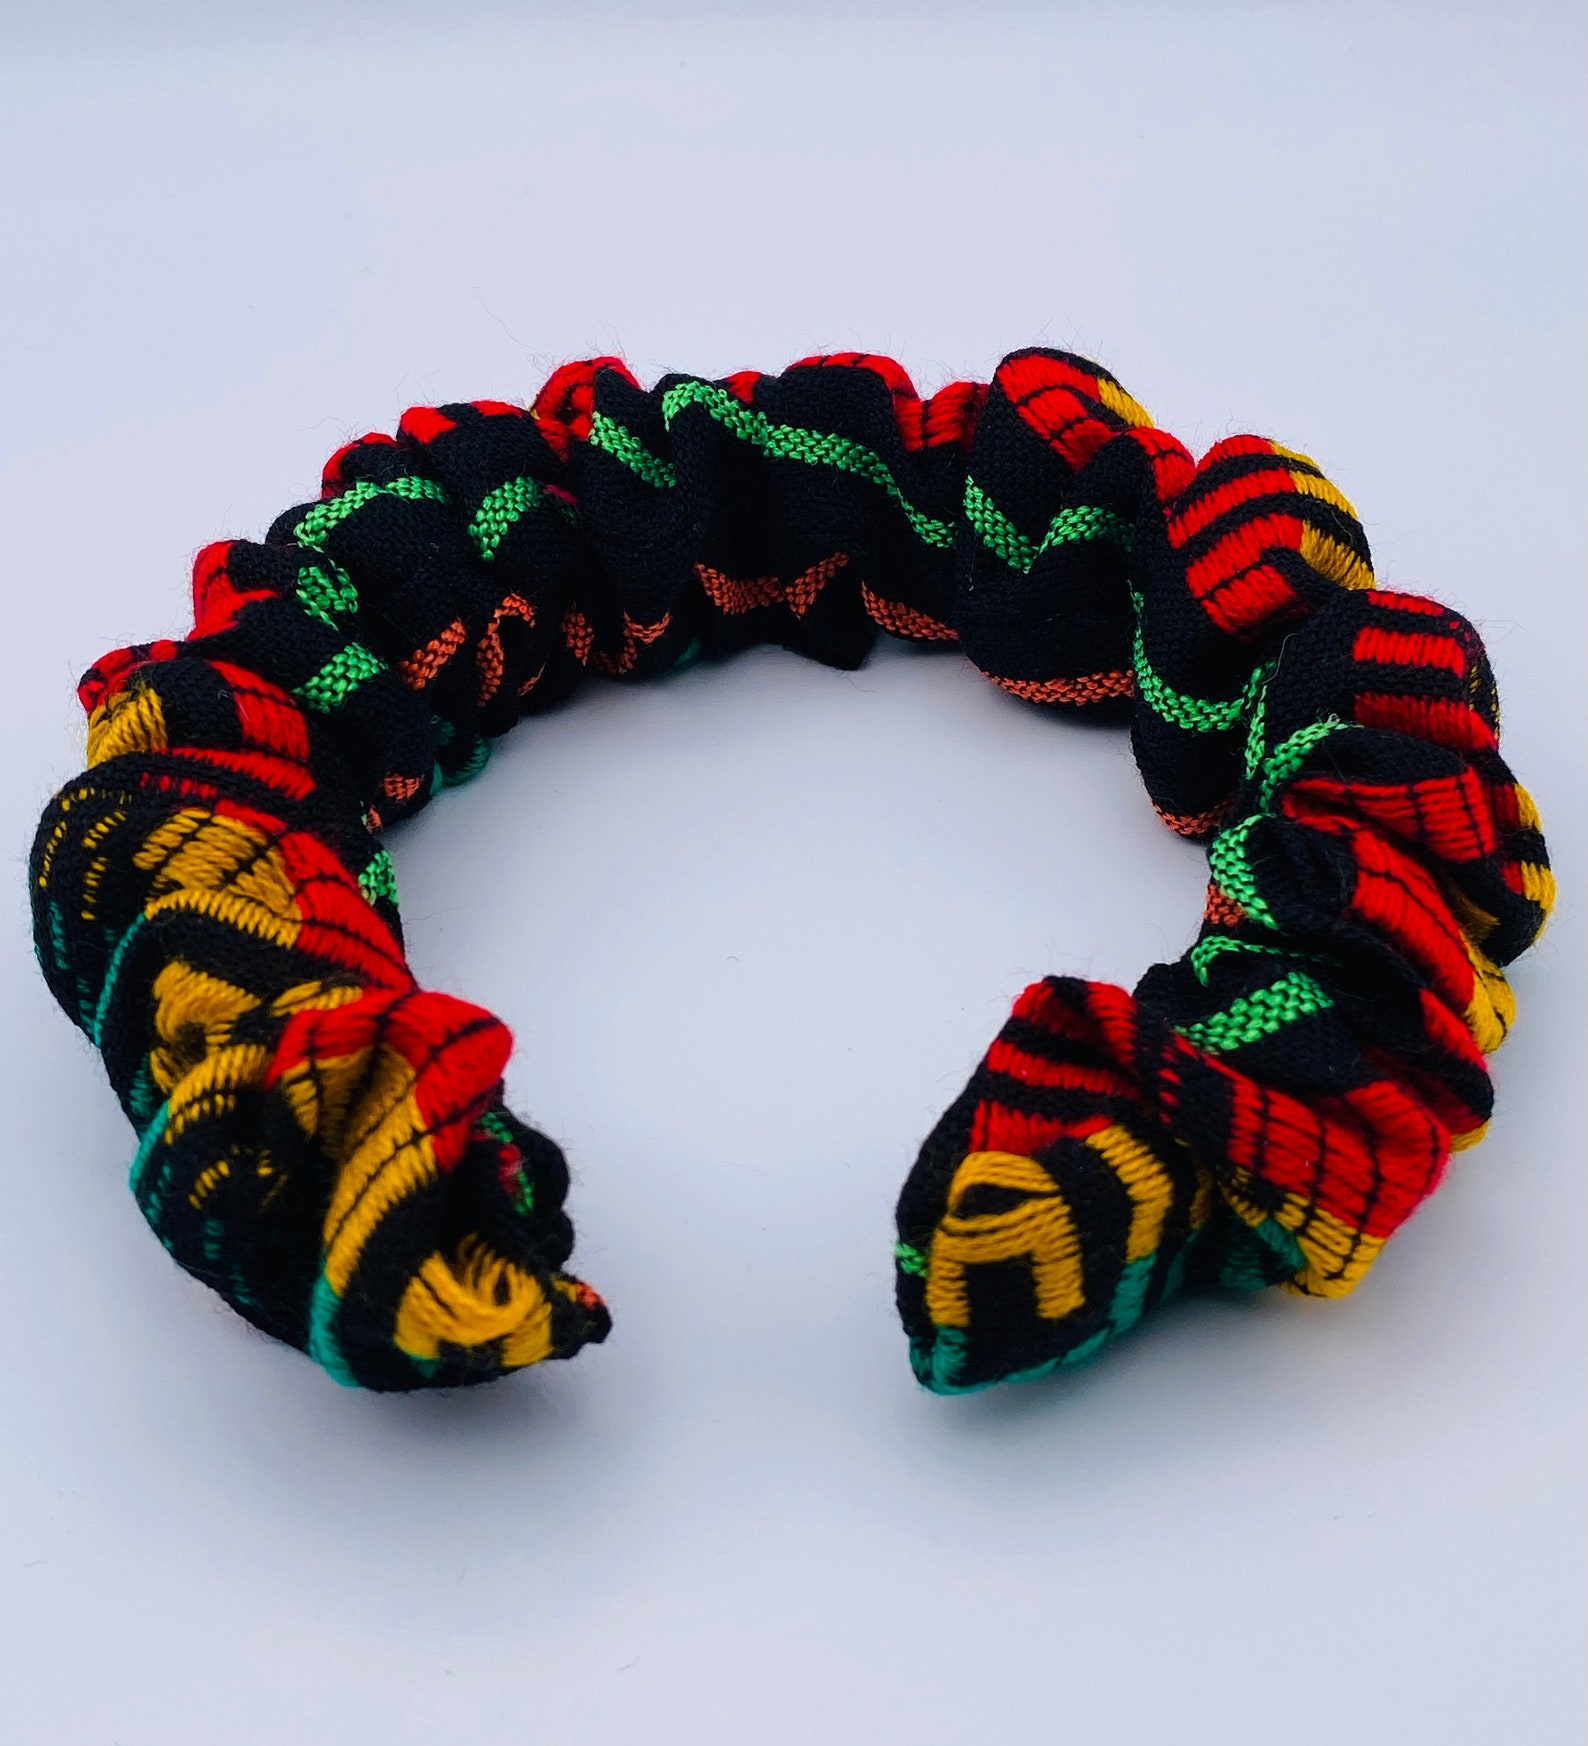 Scrunchie Headband black red green yellow Ruched Hairband | Etsy